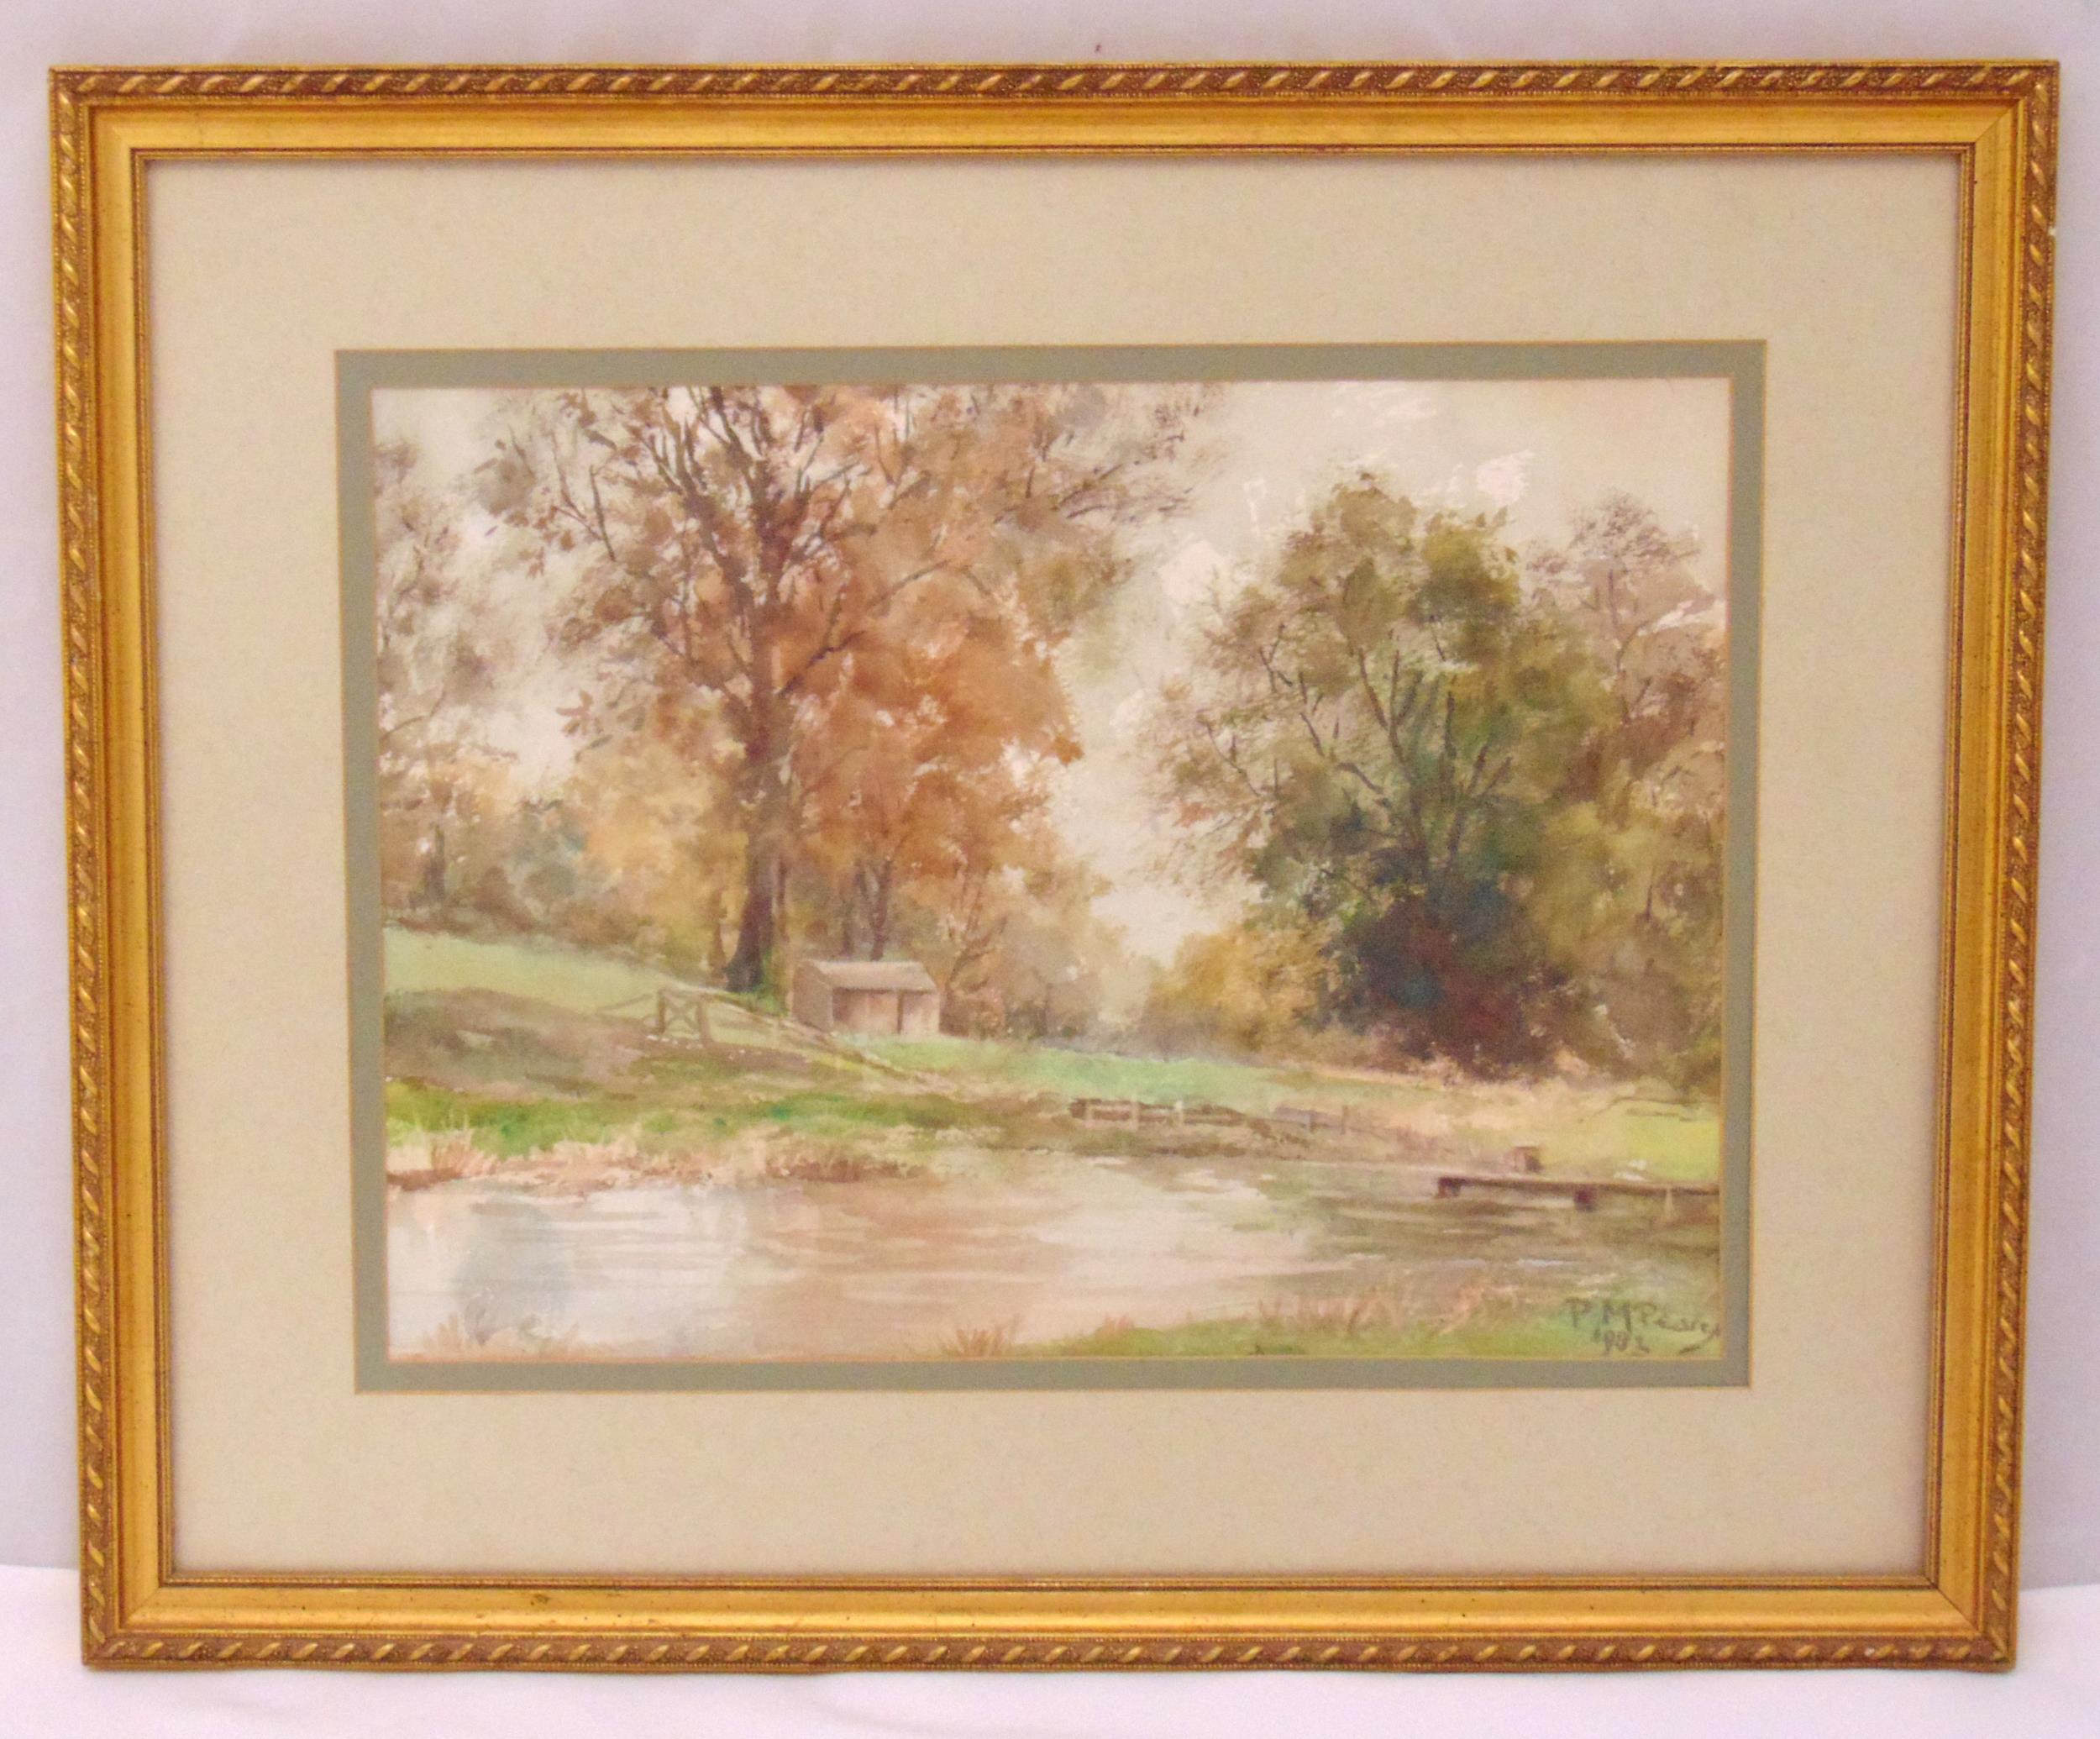 P.M. Pearce framed and glazed watercolour of a country landscape with lake and trees, signed